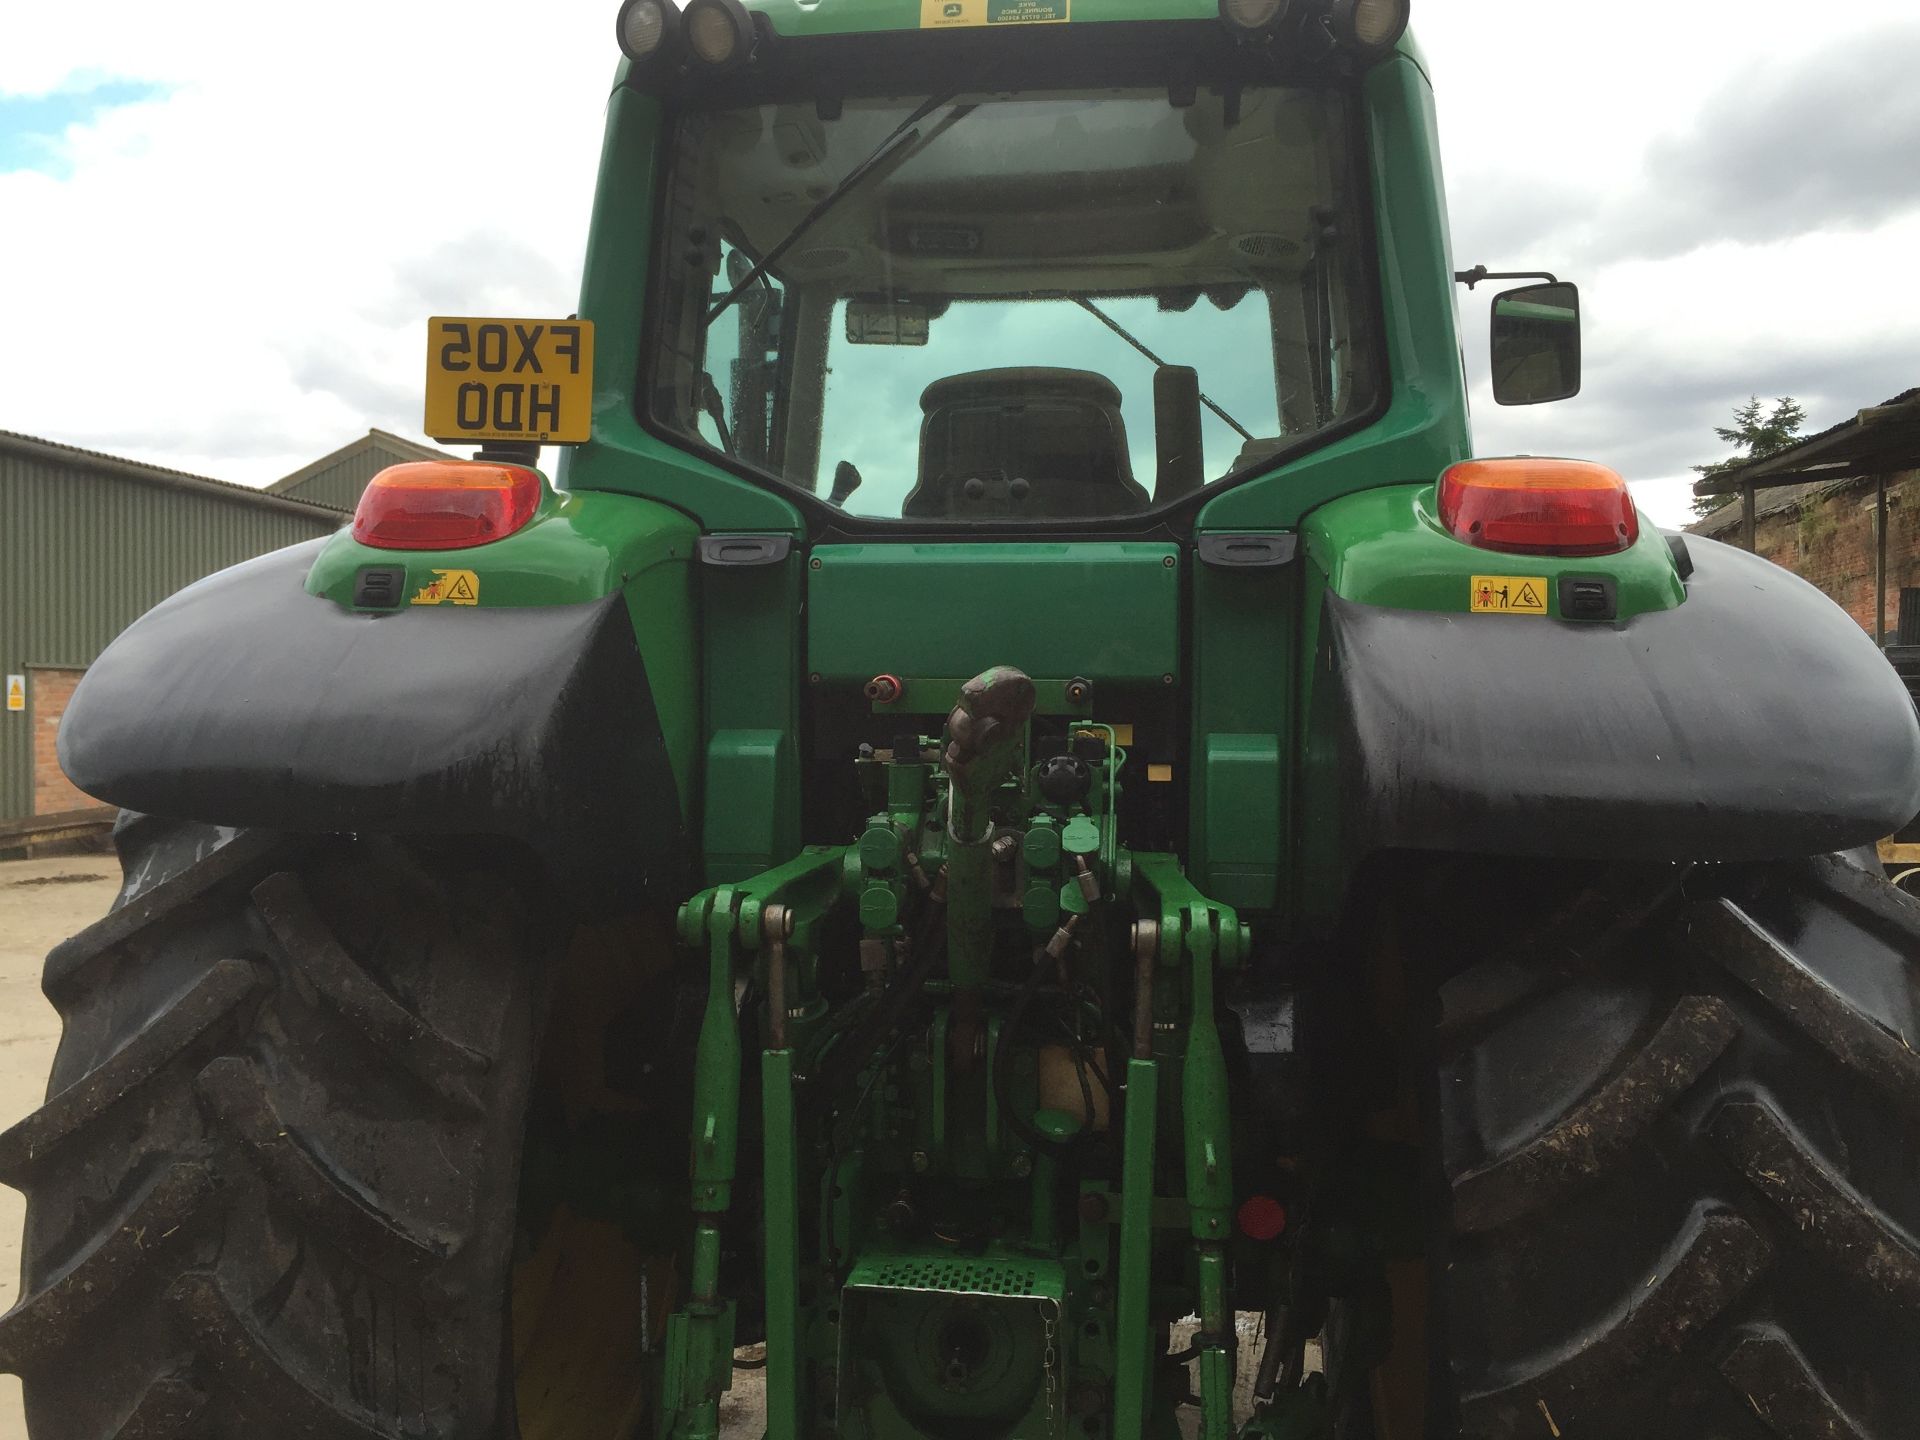 2005 John Deere 6920S Tractor 50k Power Quad c/w front linkage & pto. Location Bourne, Lincolnshire - Image 8 of 12